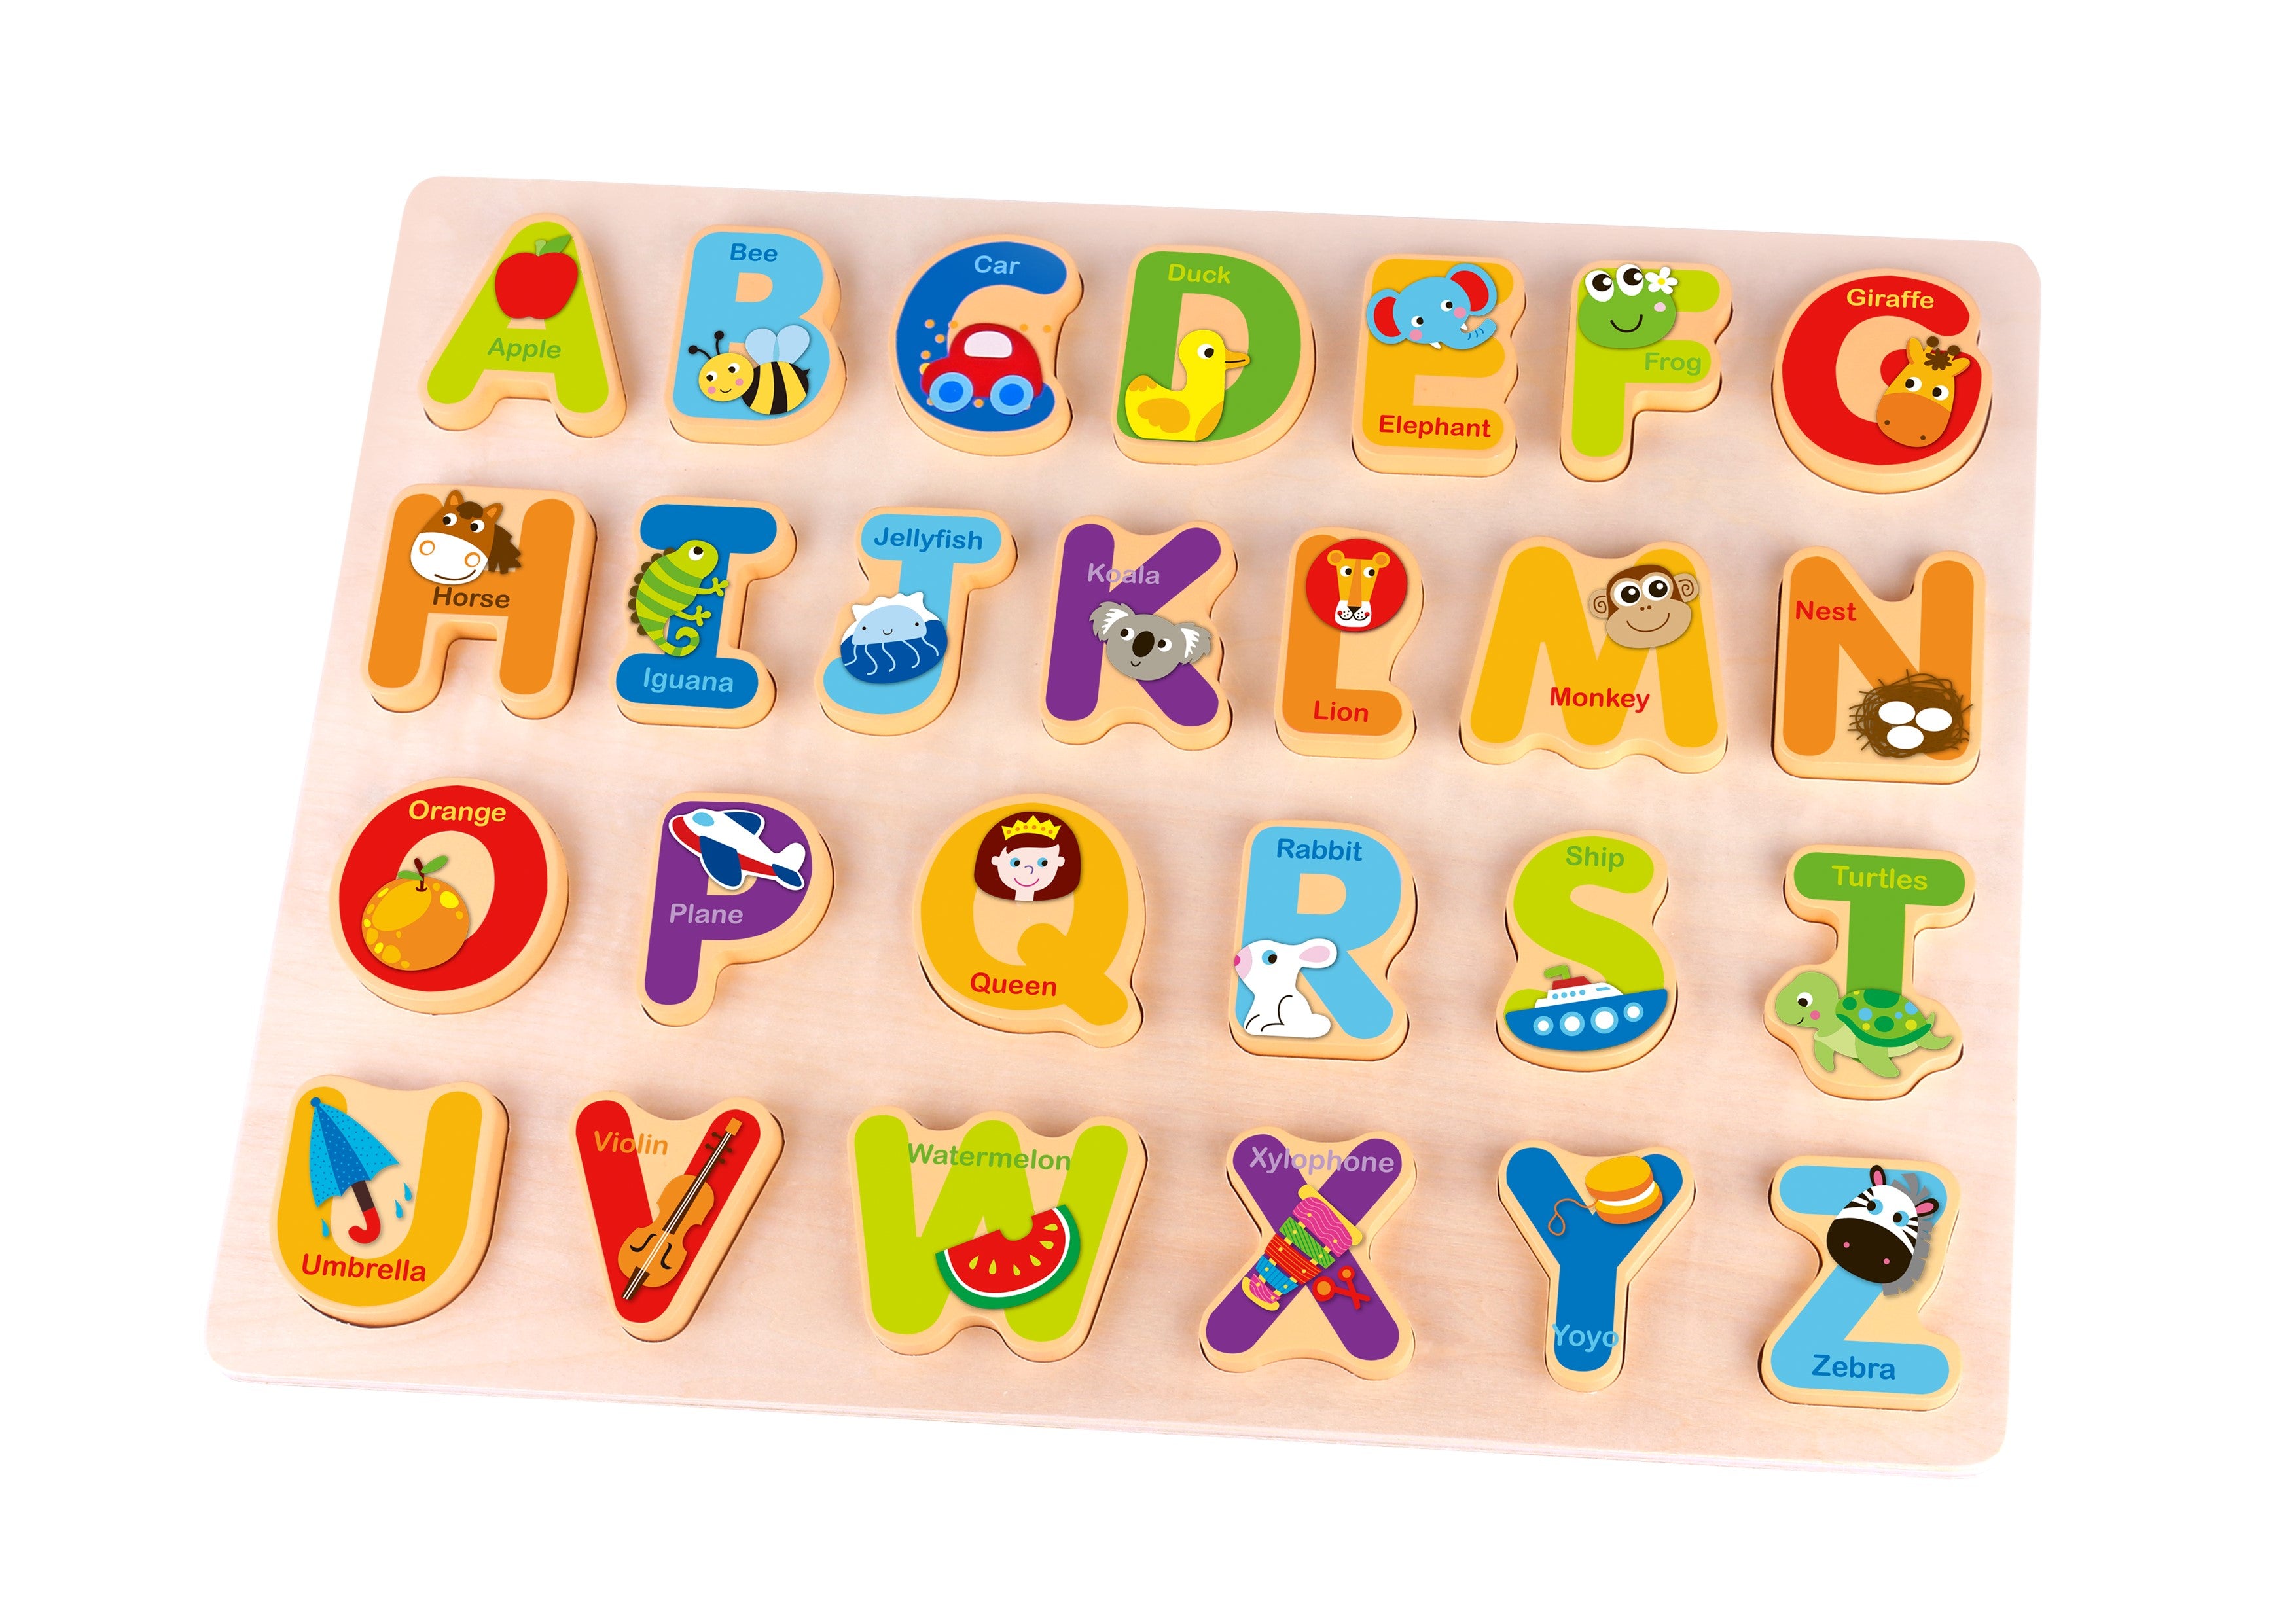 Toyster's Wooden Letters and Illustrative Adventure Learning Puzzle